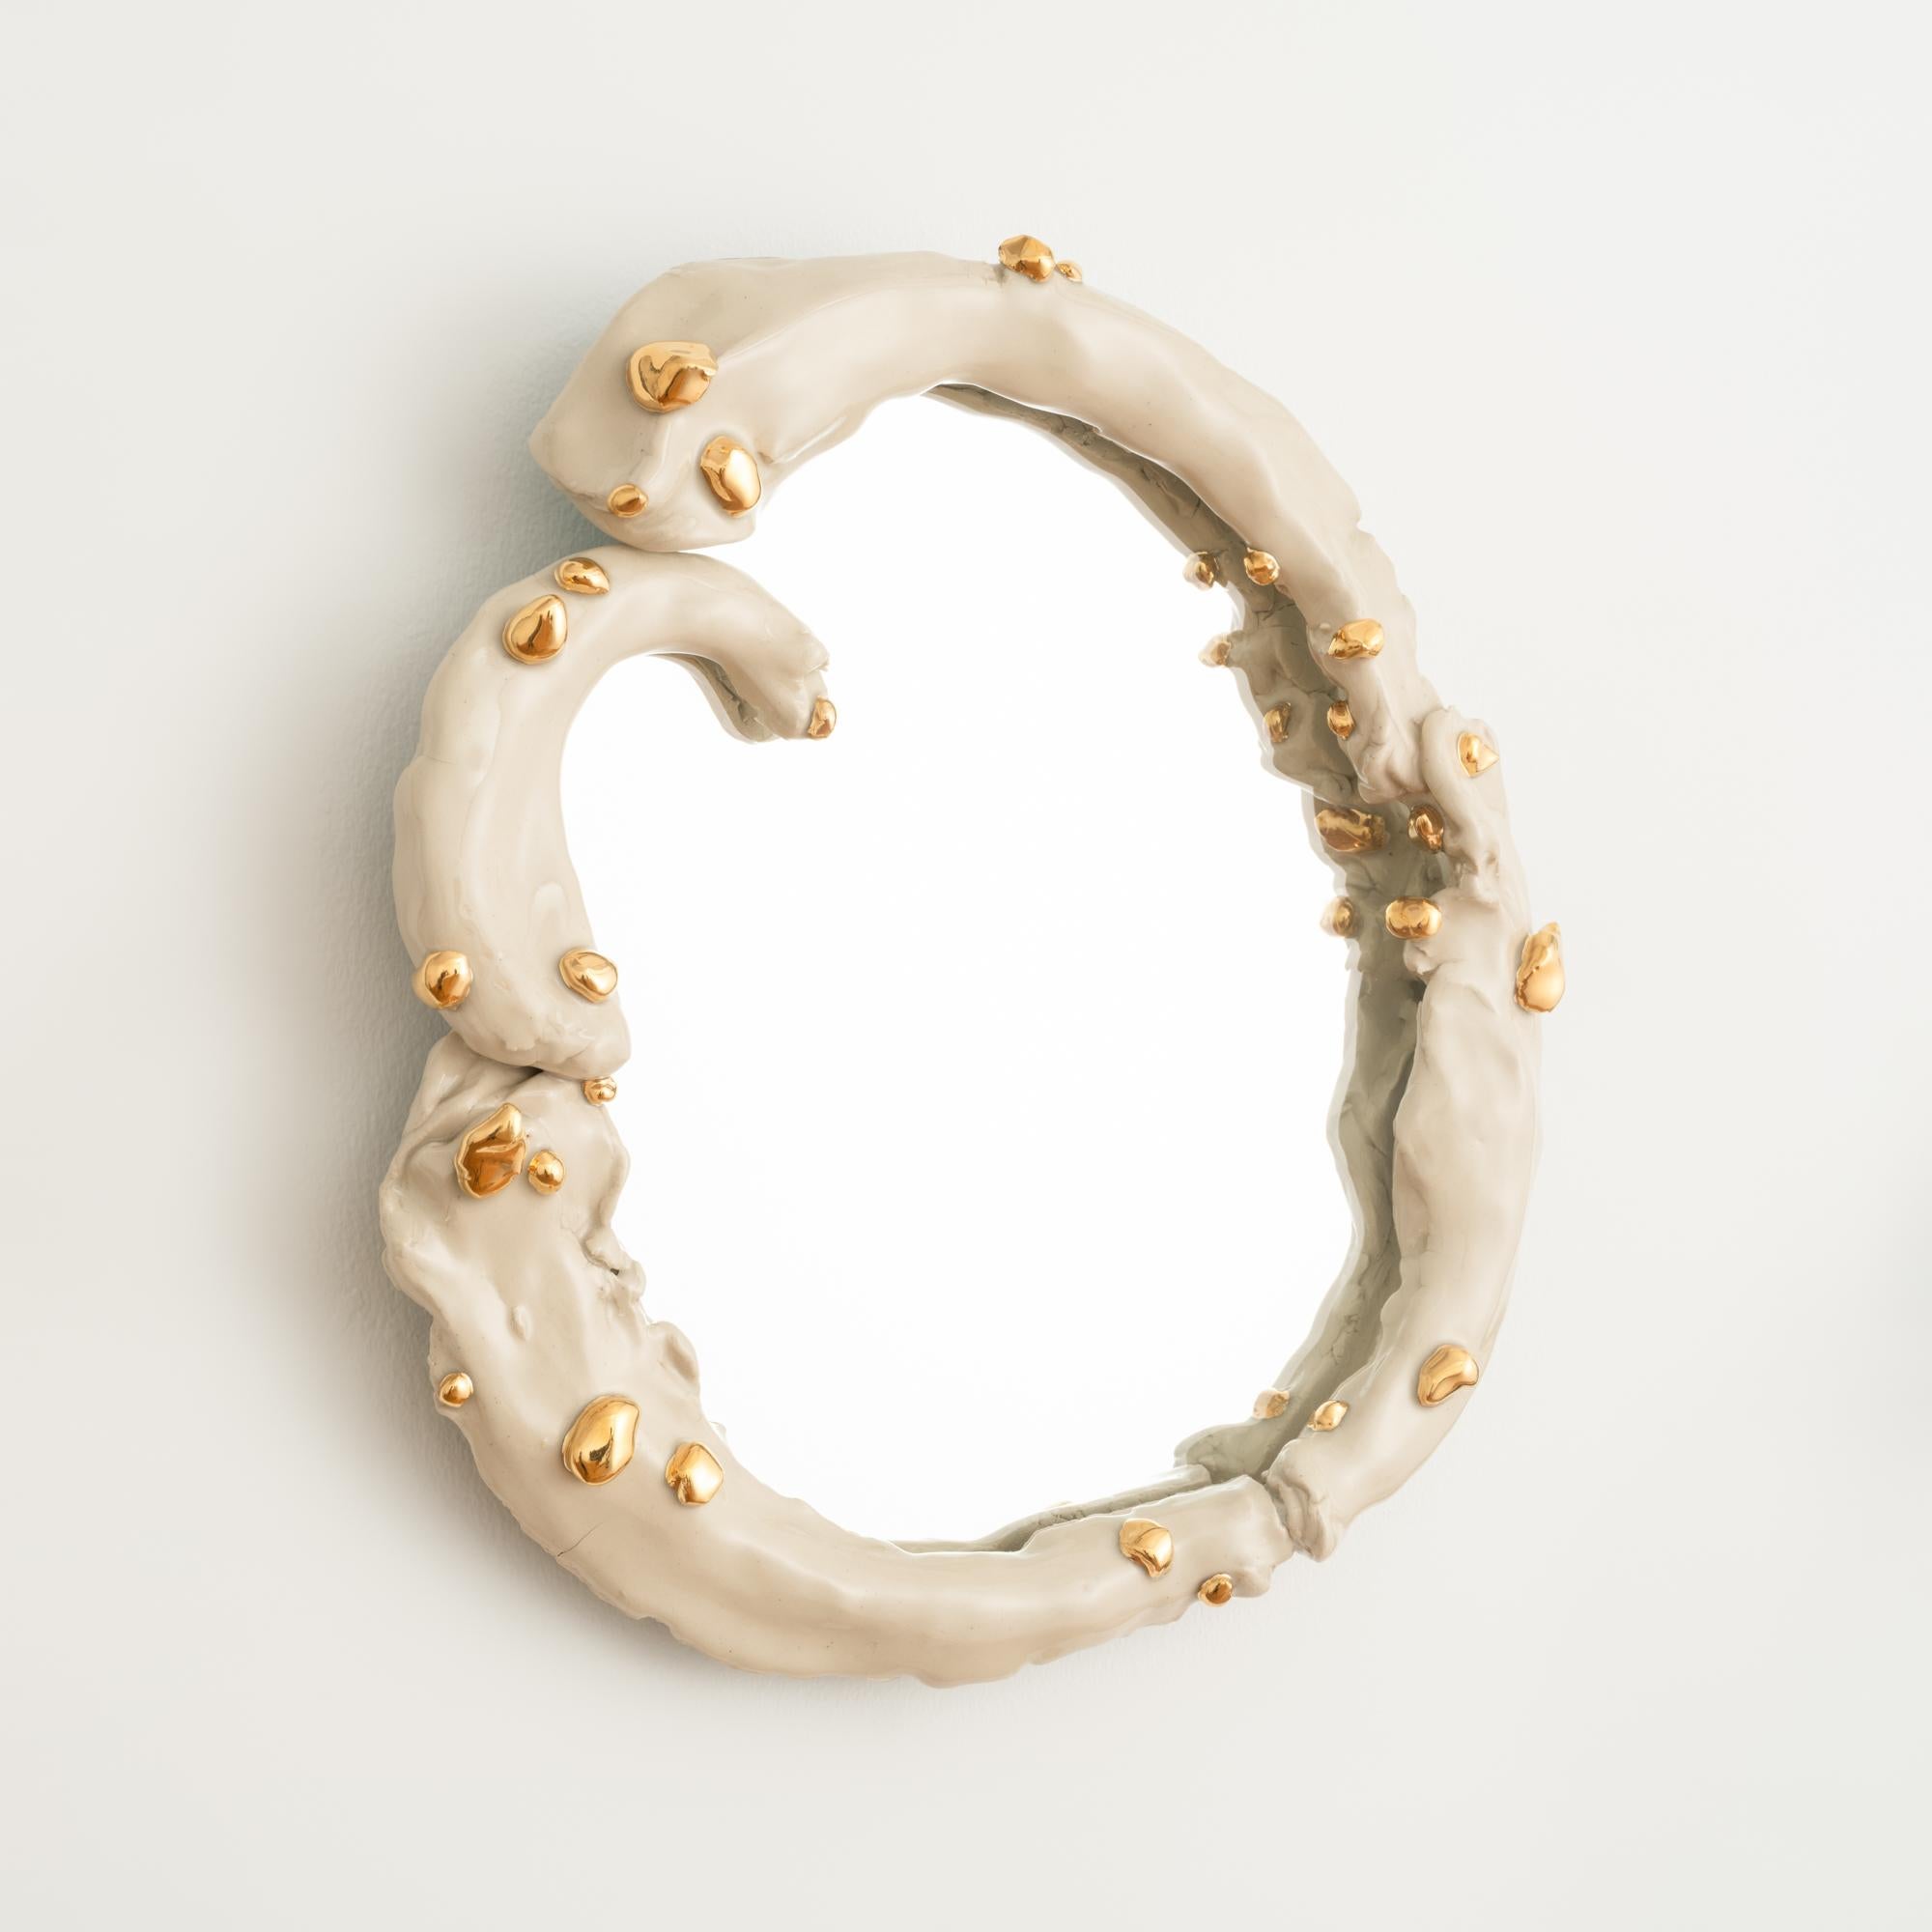 This one-of-a-kind circular wall mirror features a hand-built stoneware frame finished in a glossy cream-colored glaze and embellished with blob-like applications of 22k gold luster. 

Both functional and visually striking, this ornate and